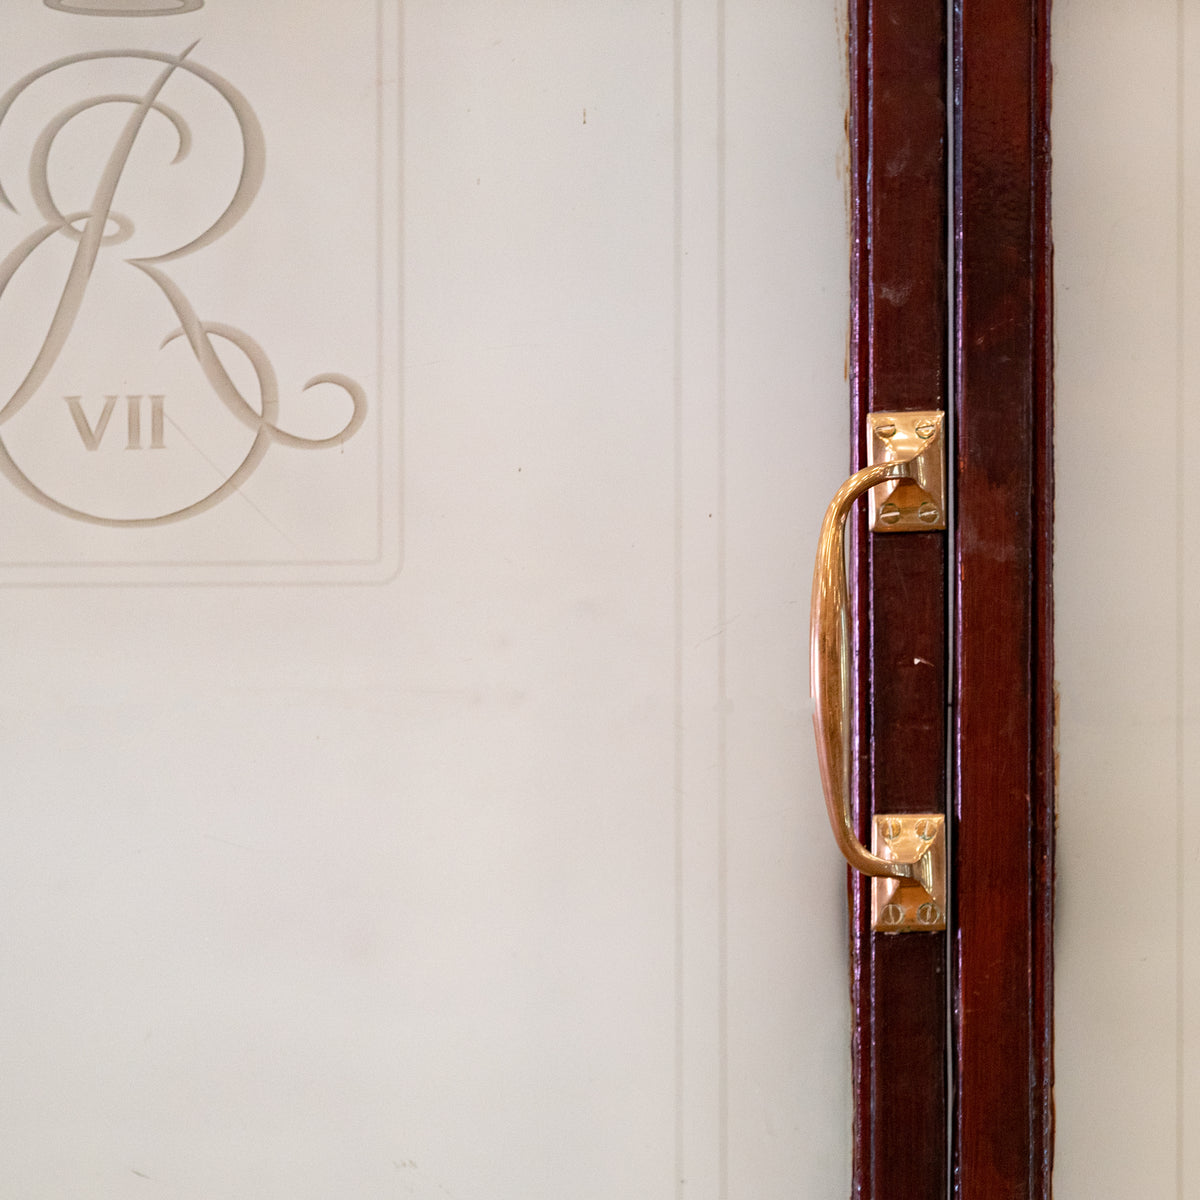 Reclaimed King Edward VII Royal Hospital Glazed Double Doors | The Architectural Forum